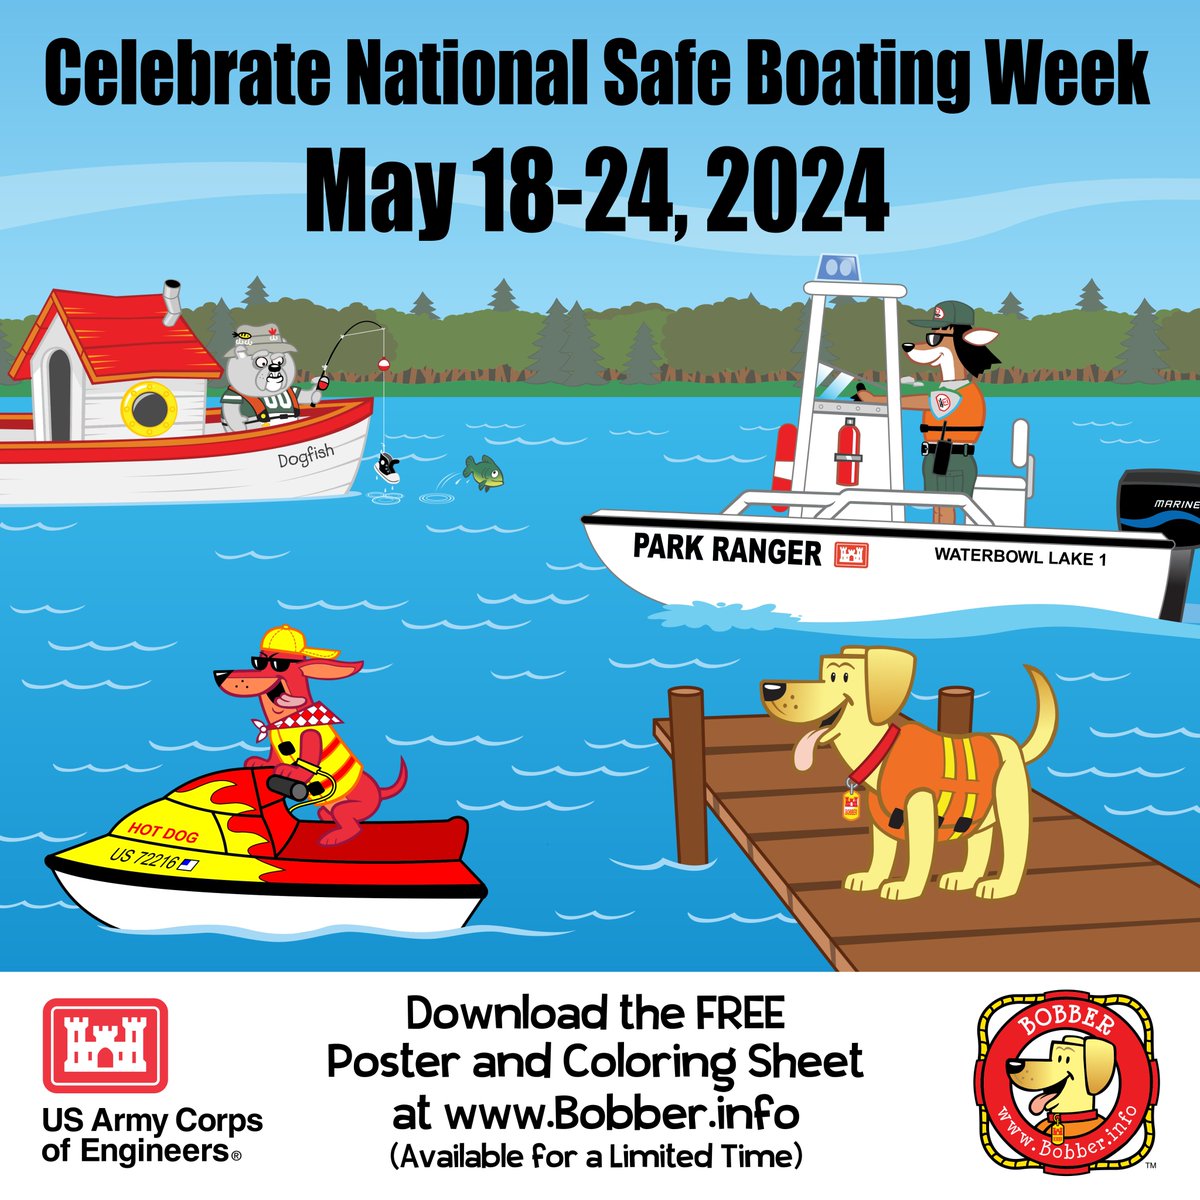 Help ensure that you have a great National Safe Boating Week by wearing a life jacket! You never know when an unexpected fall overboard could change your life and the lives of those who love you. #safeboatingweek @Pleasewearit #LifeJacketsWornNobodyMourns